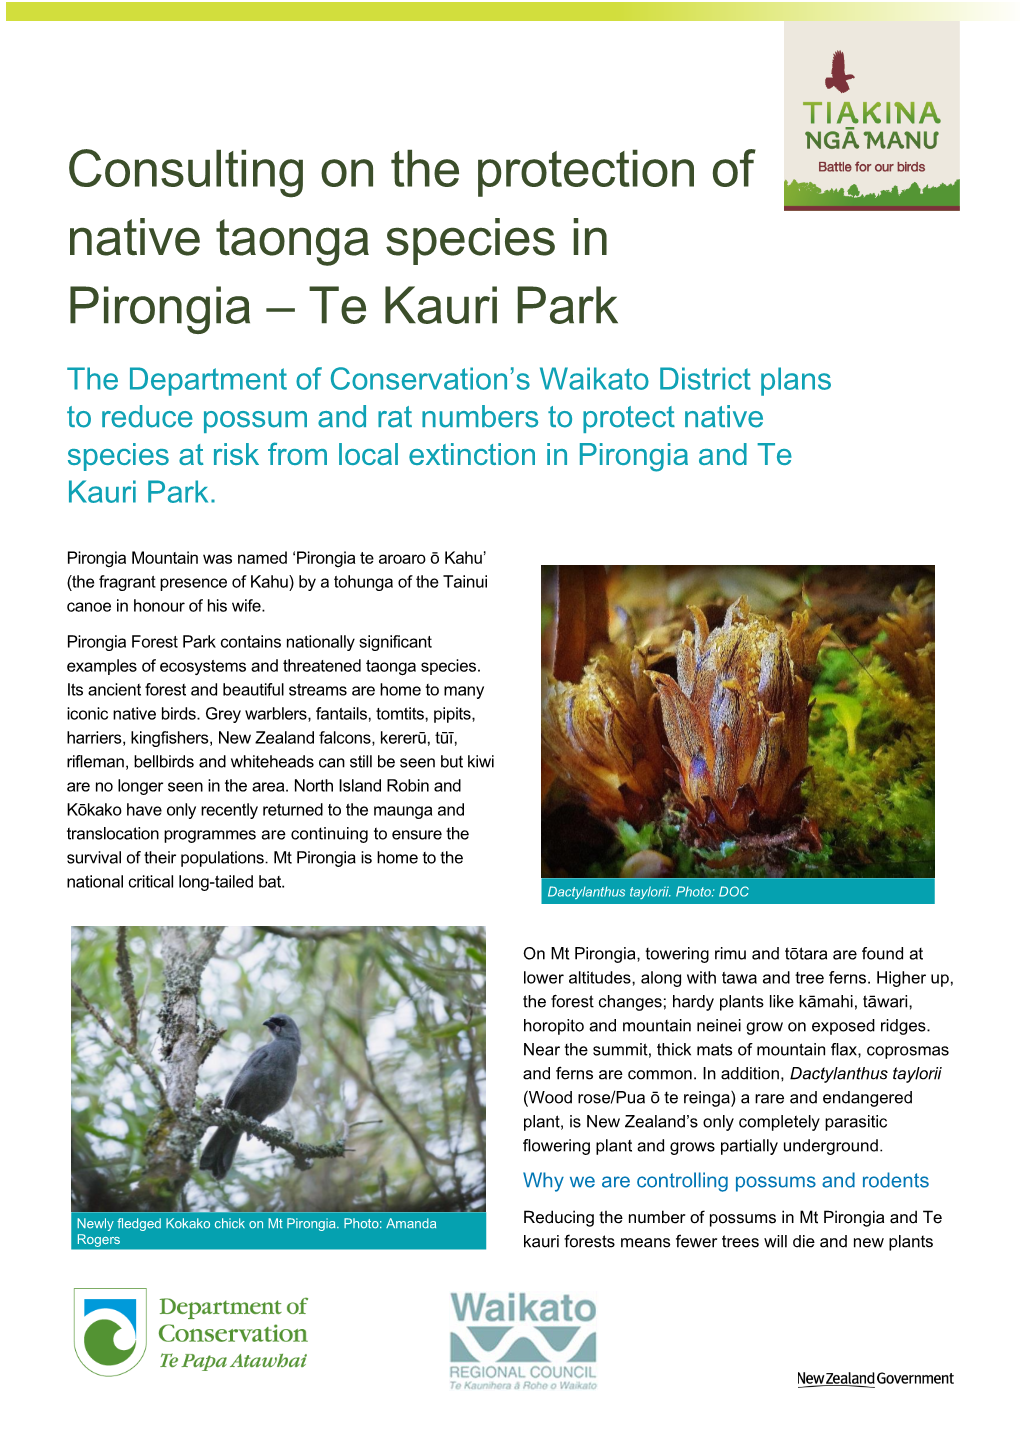 Consulting on the Protection of Native Taonga Species in Pirongia – Te Kauri Park